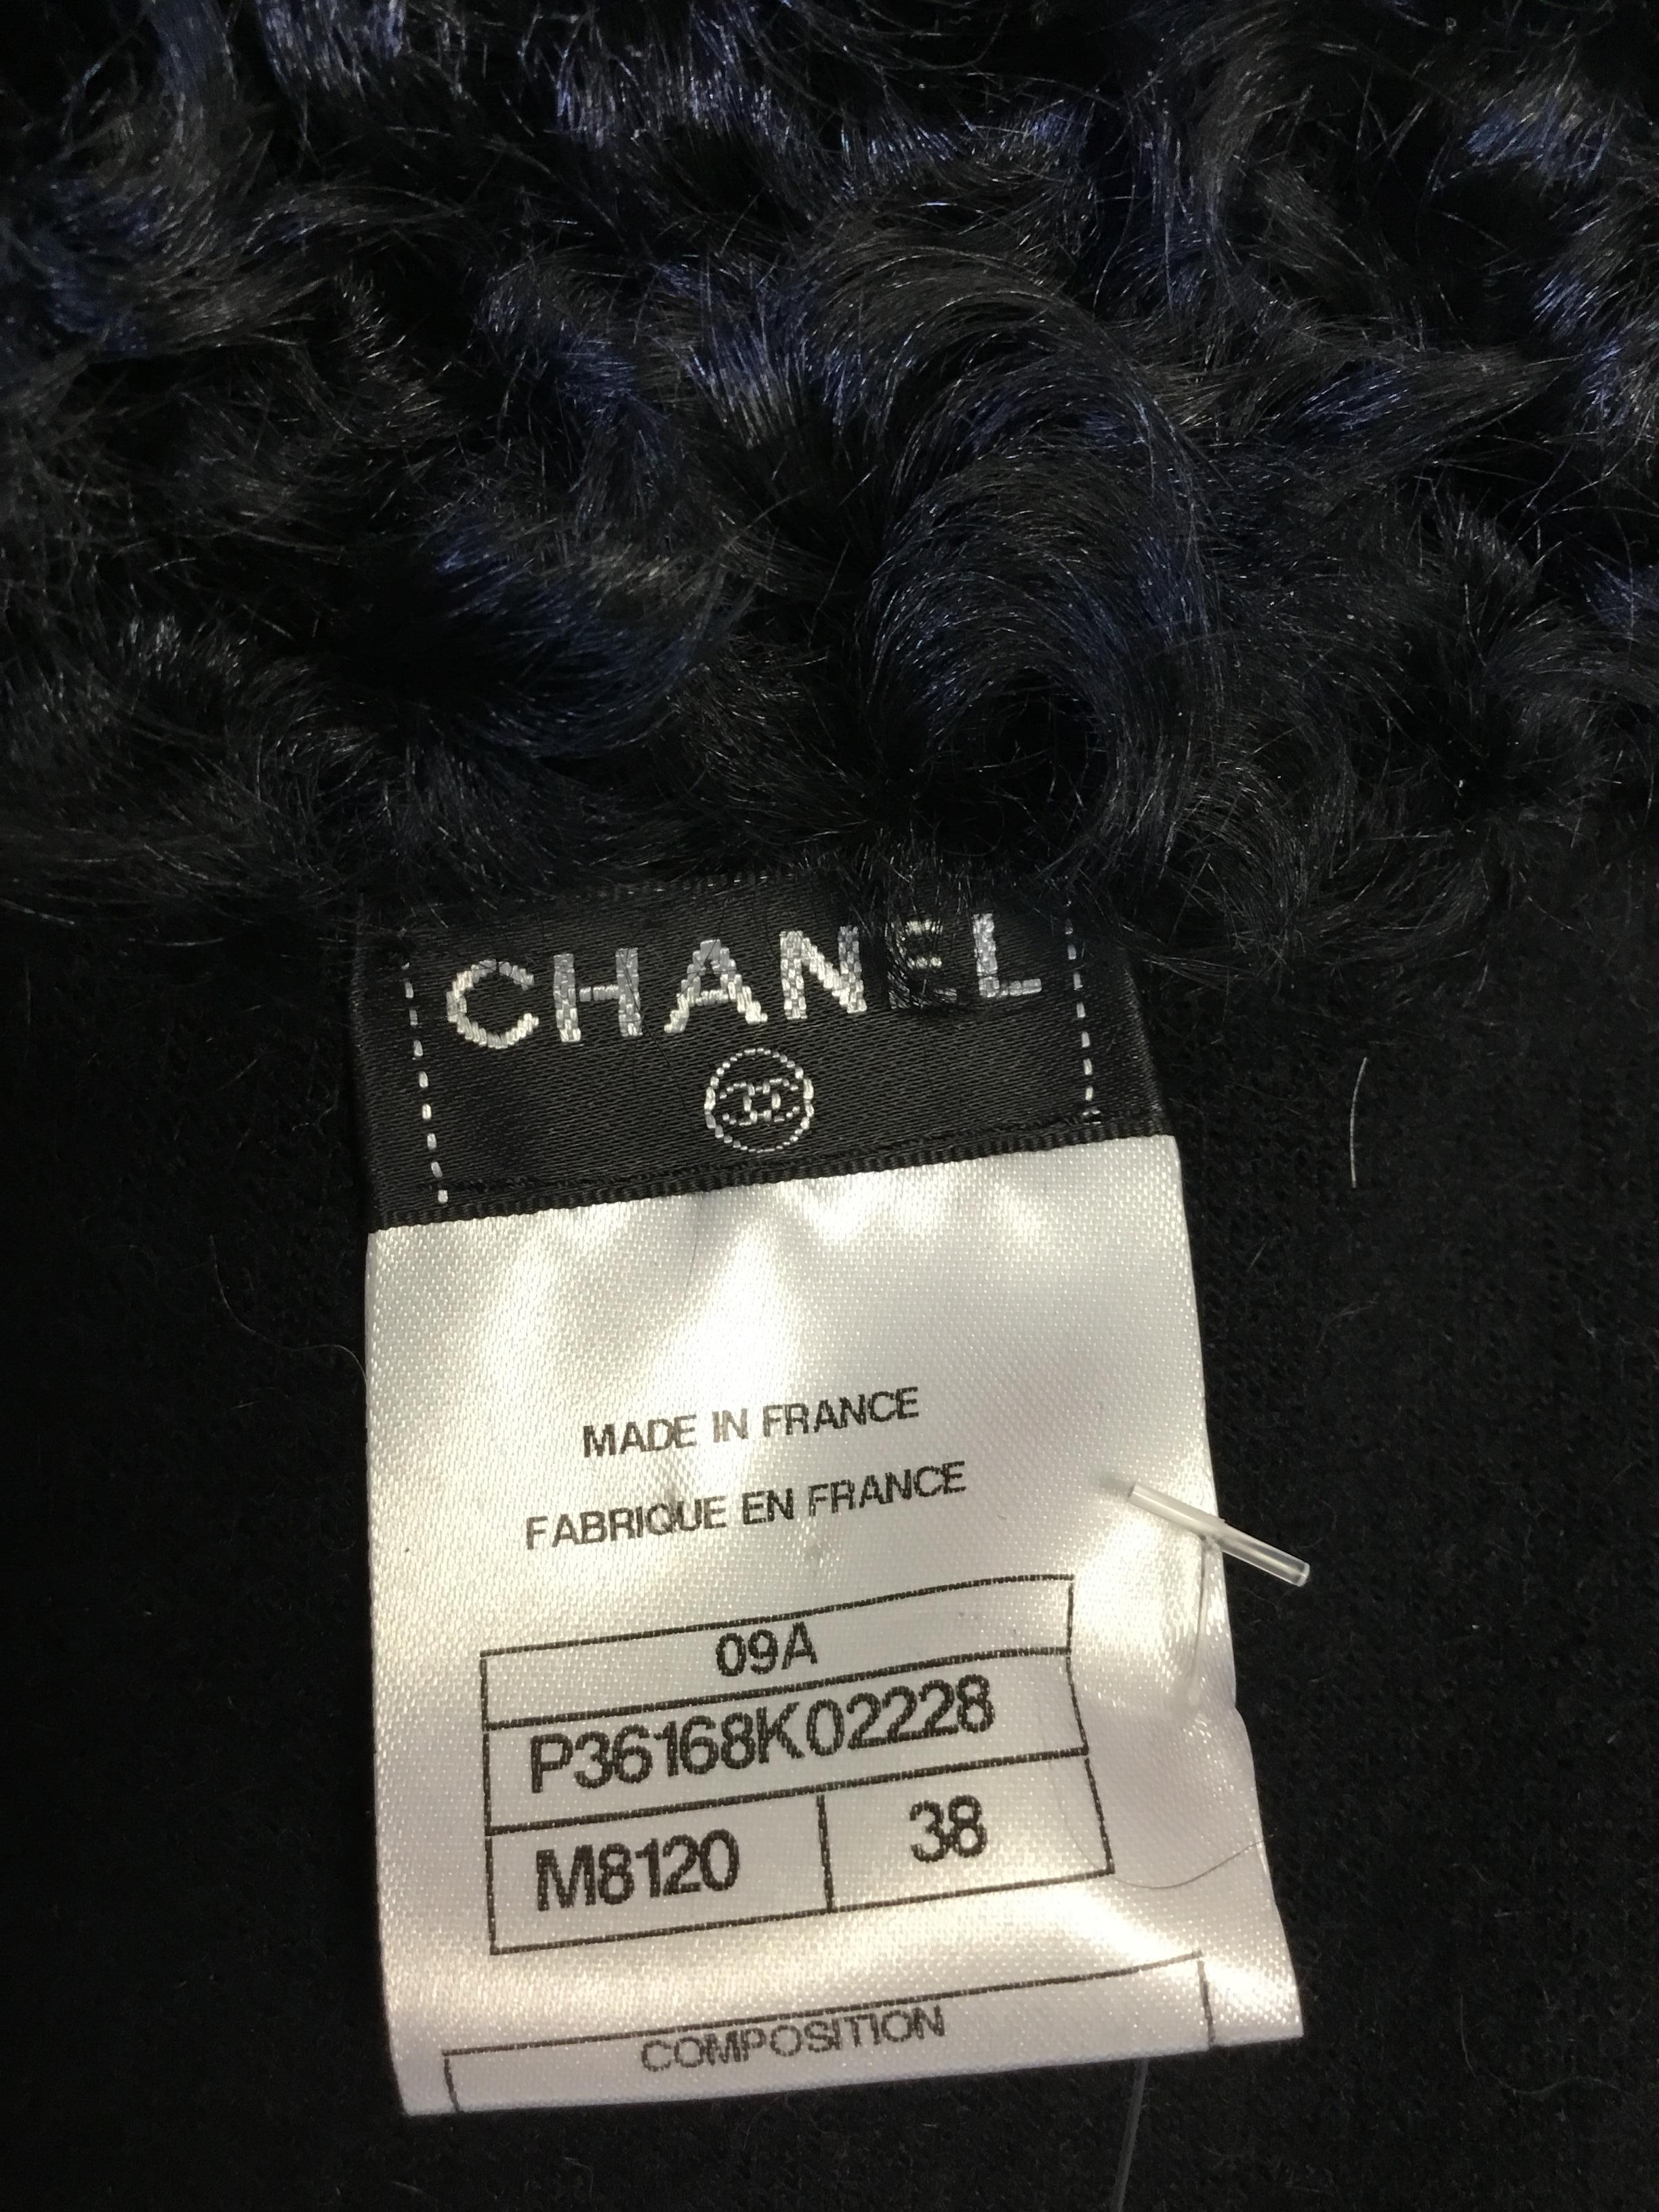 Chanel 'Moscow' Collection Fur Trimmed Coat For Sale 3